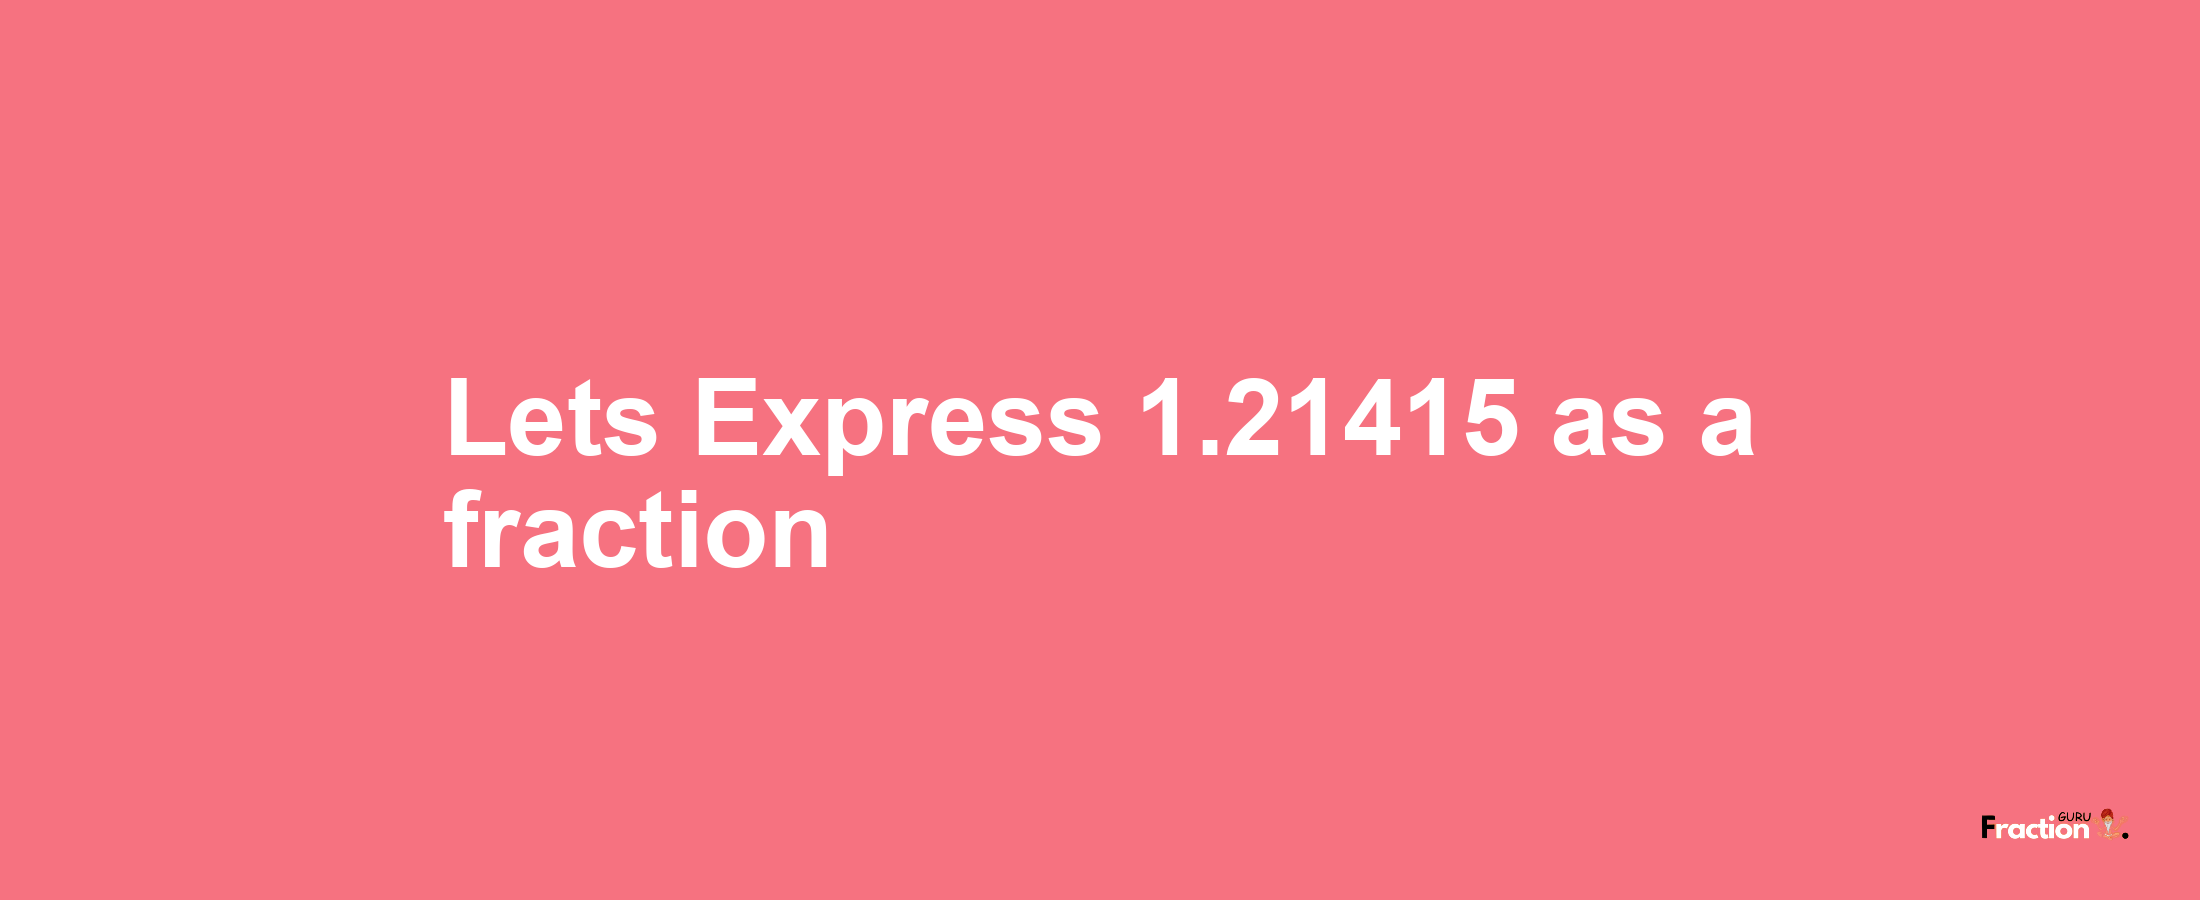 Lets Express 1.21415 as afraction